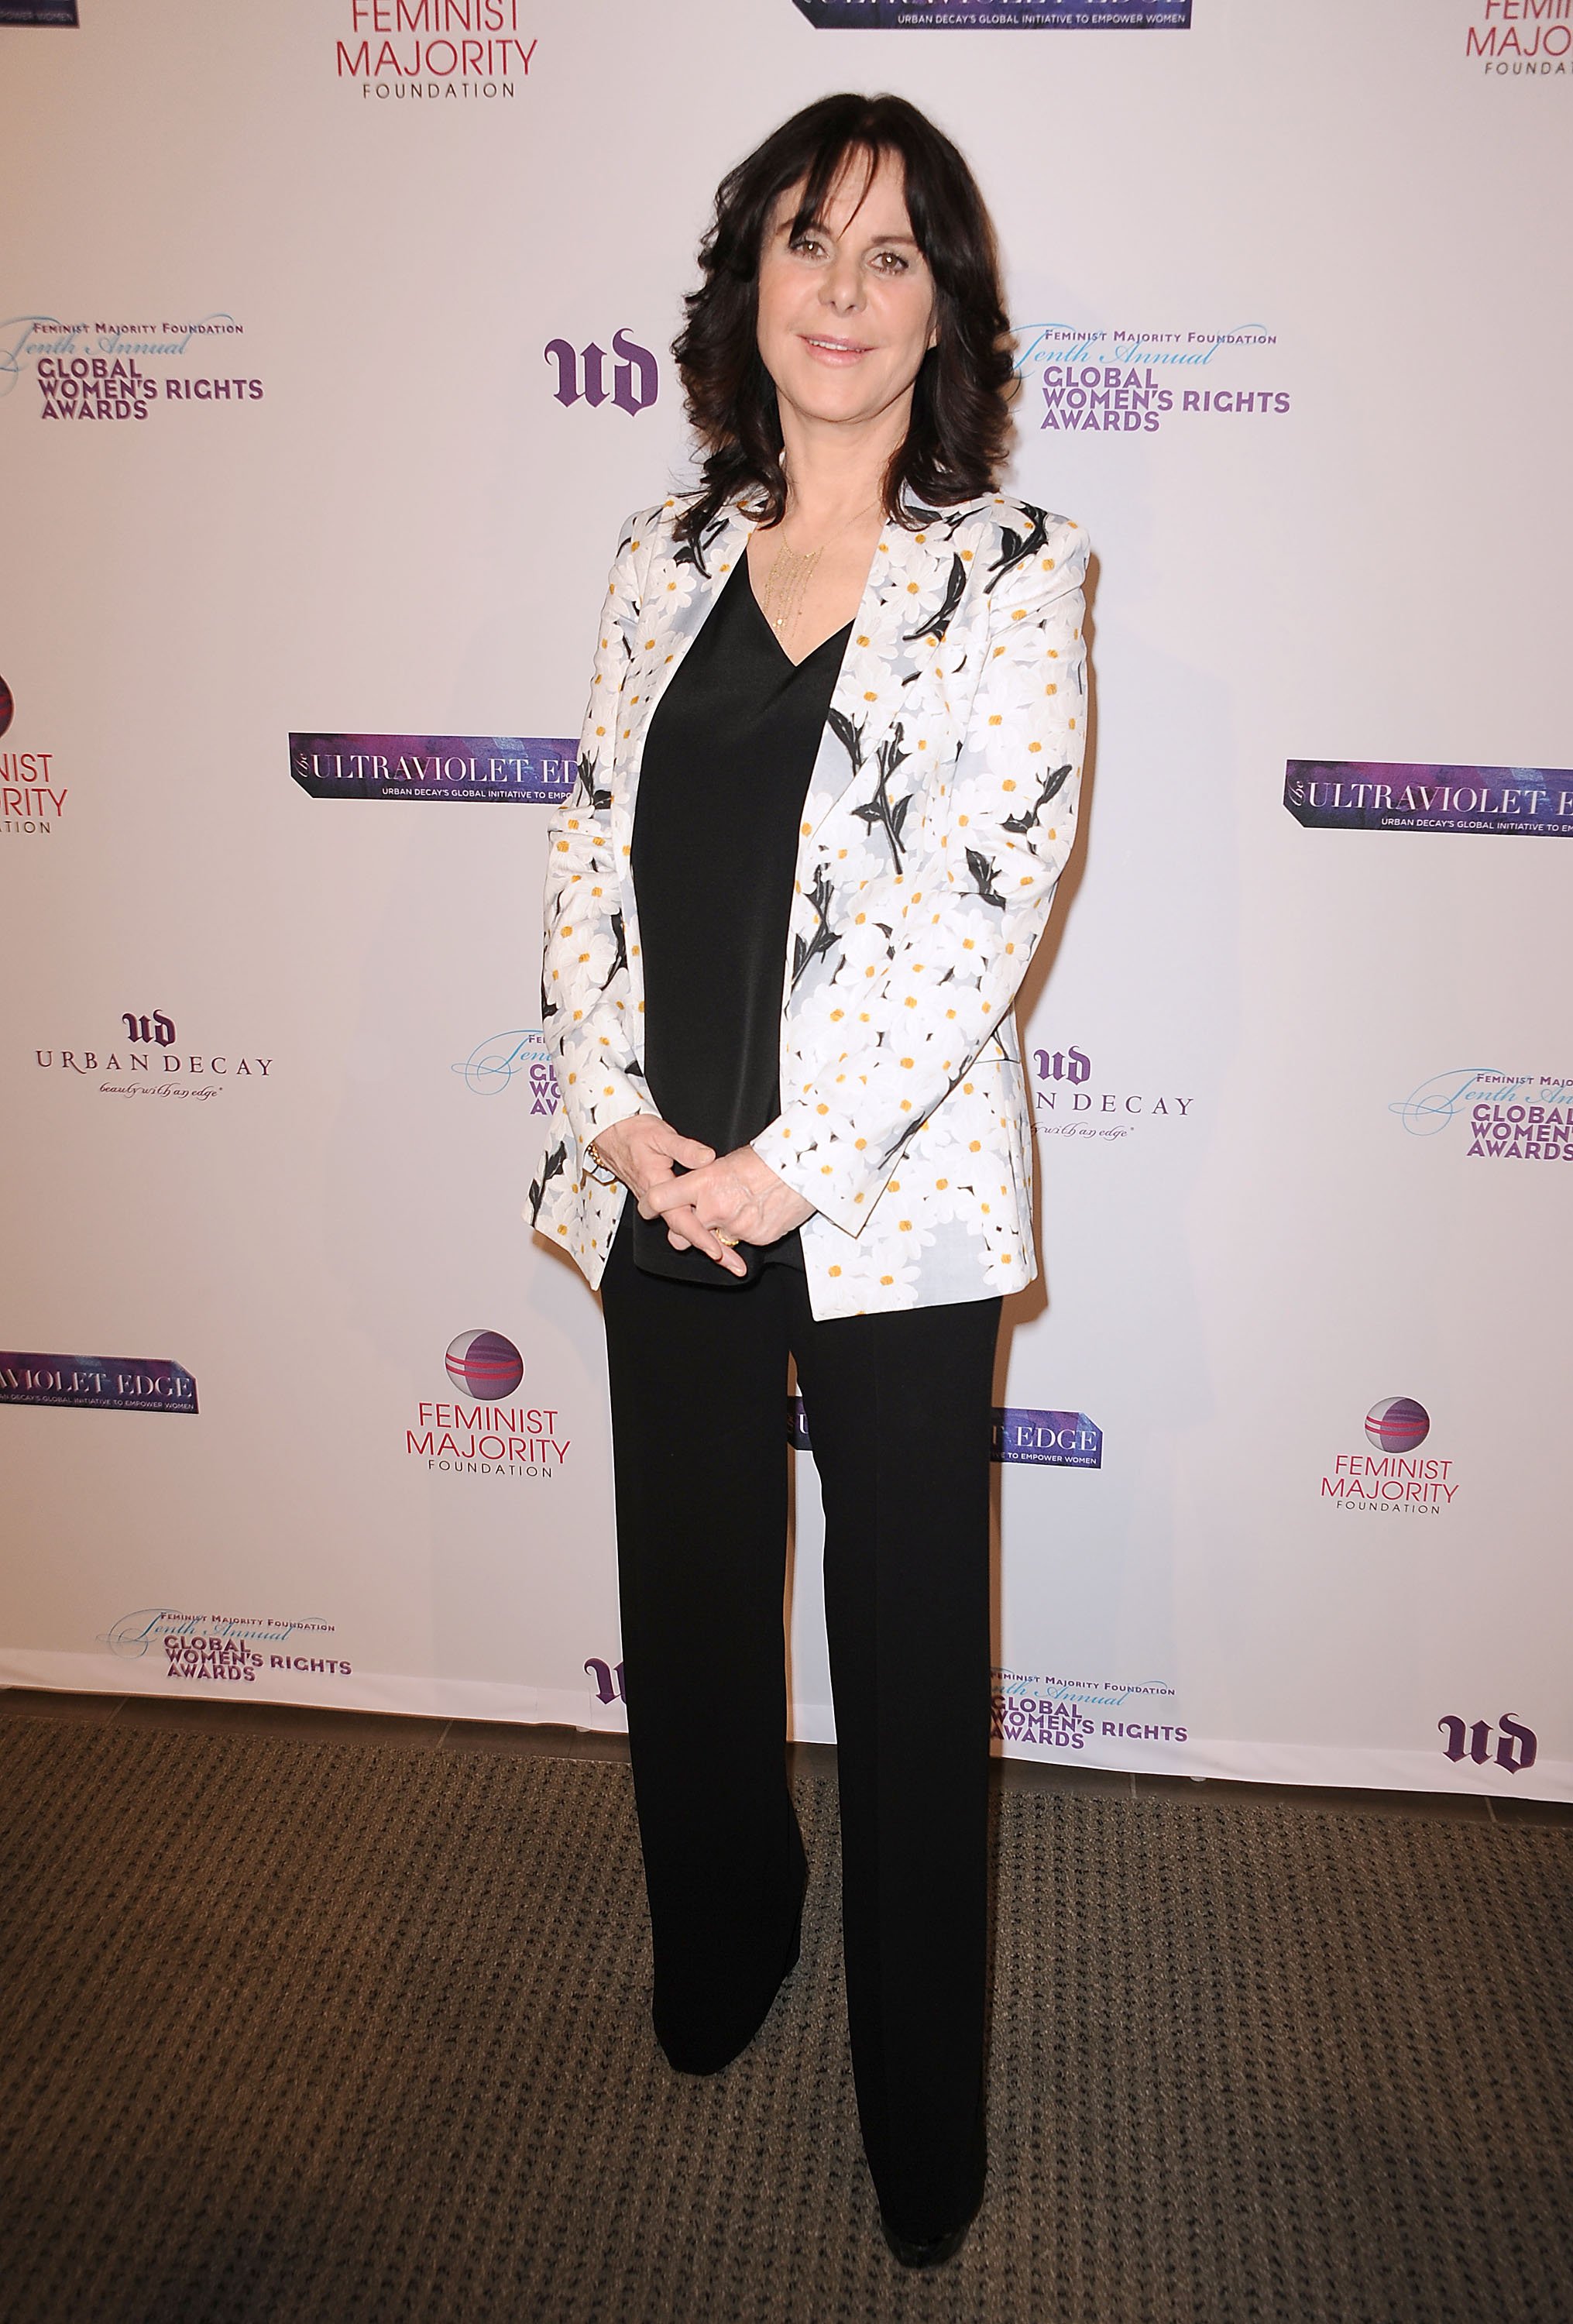 Mavis Leno at the 10th annual Global Women's Rights Awards on May 18, 2015 in California | Source: Getty Images